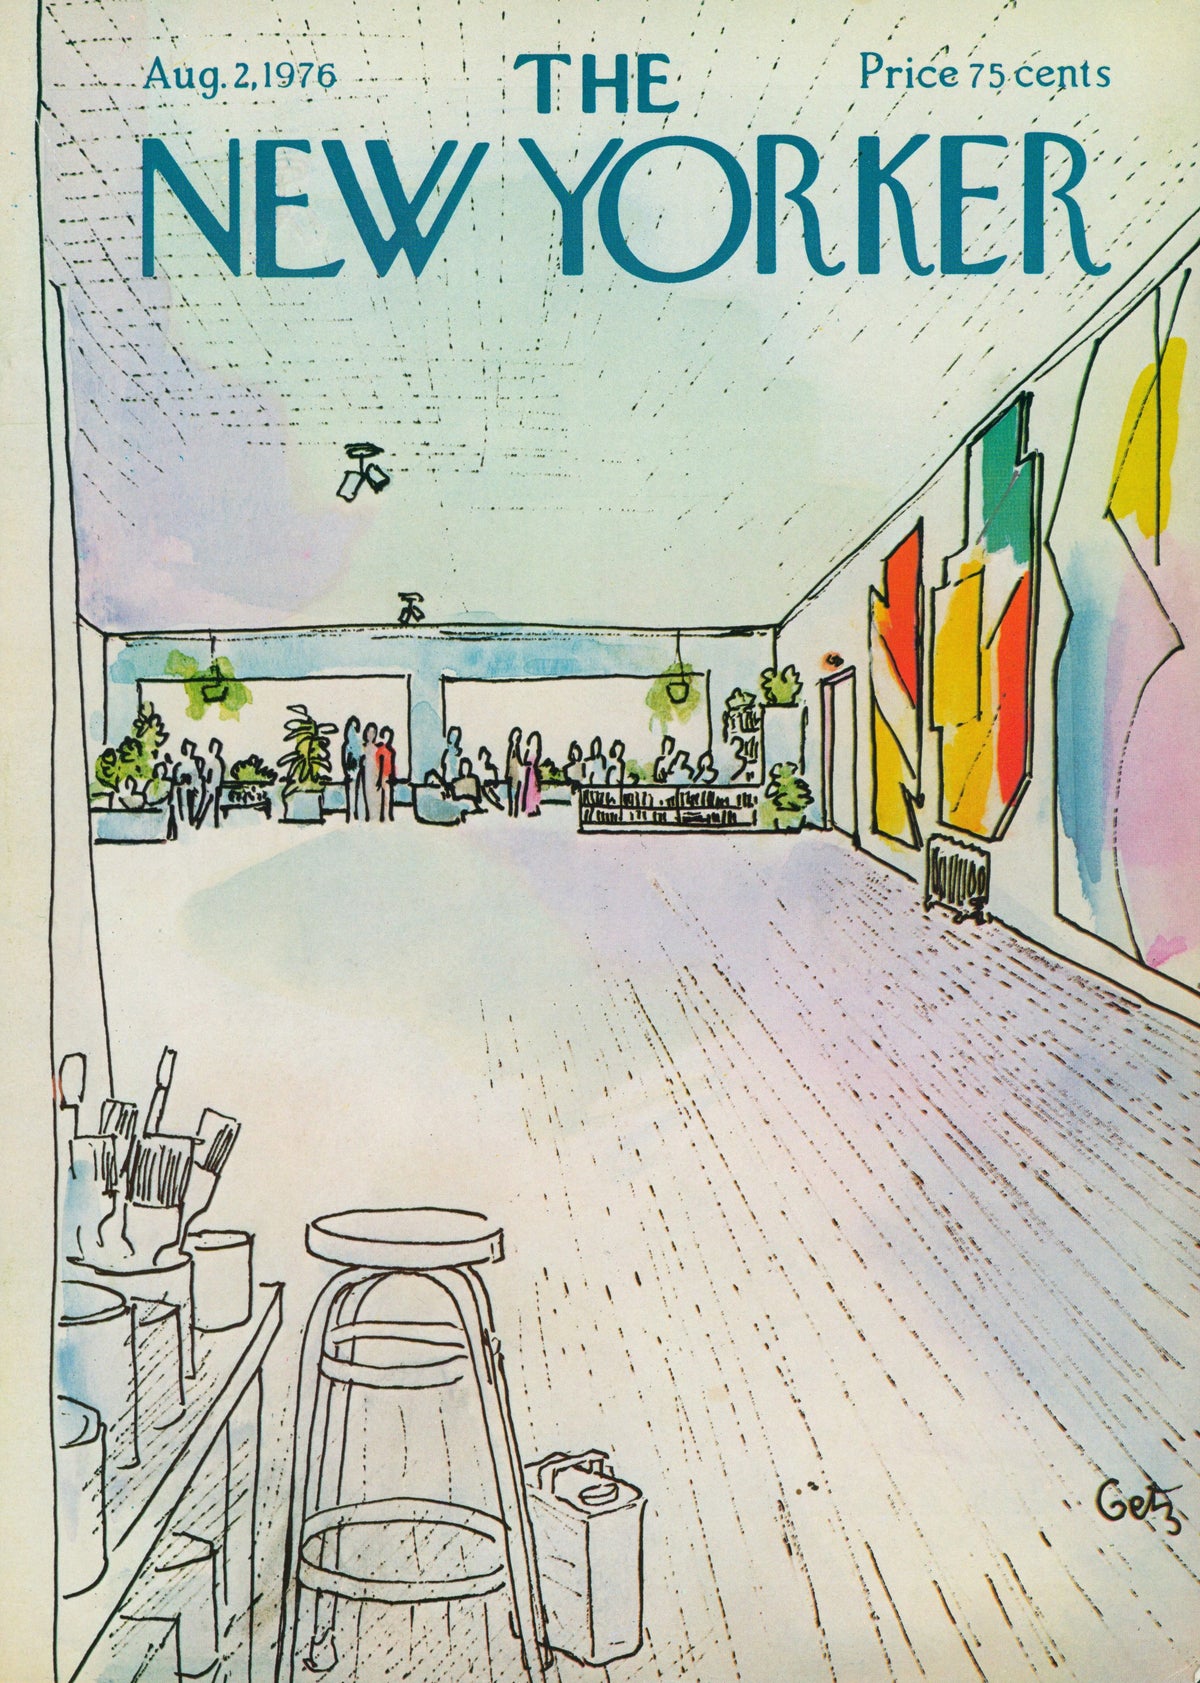 Gallery Tour- The New Yorker - Authentic Vintage Antique Print